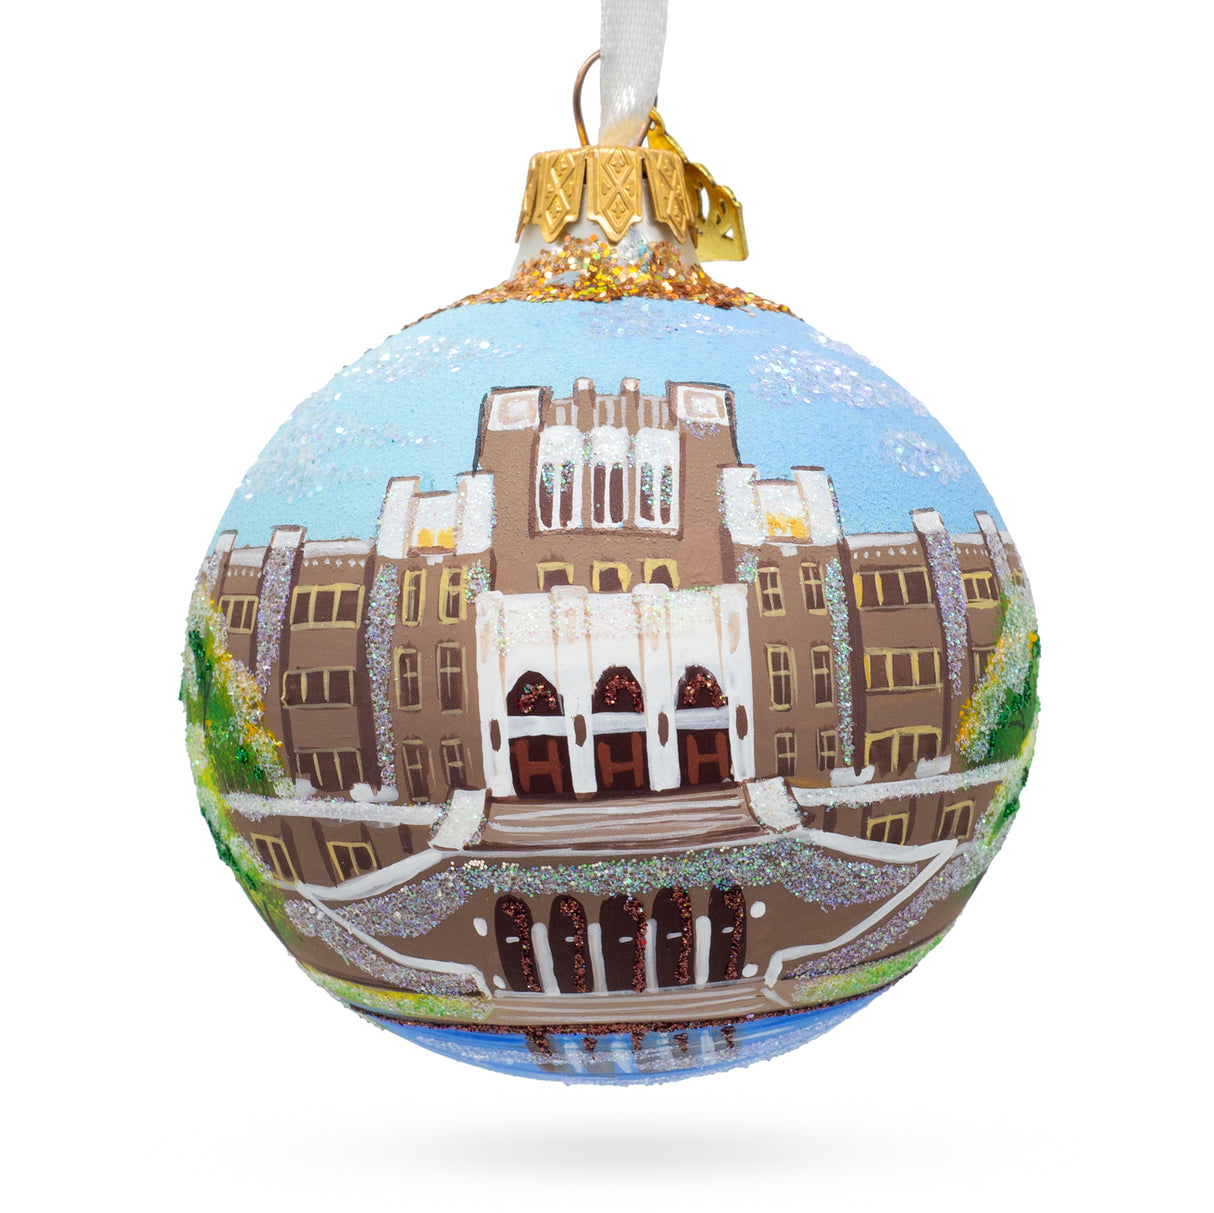 Glass Little Rock Central High School National Historic Site, Little Rock, Arkansas, USA Glass Ball Christmas Ornament 3.25 Inches in Multi color Round